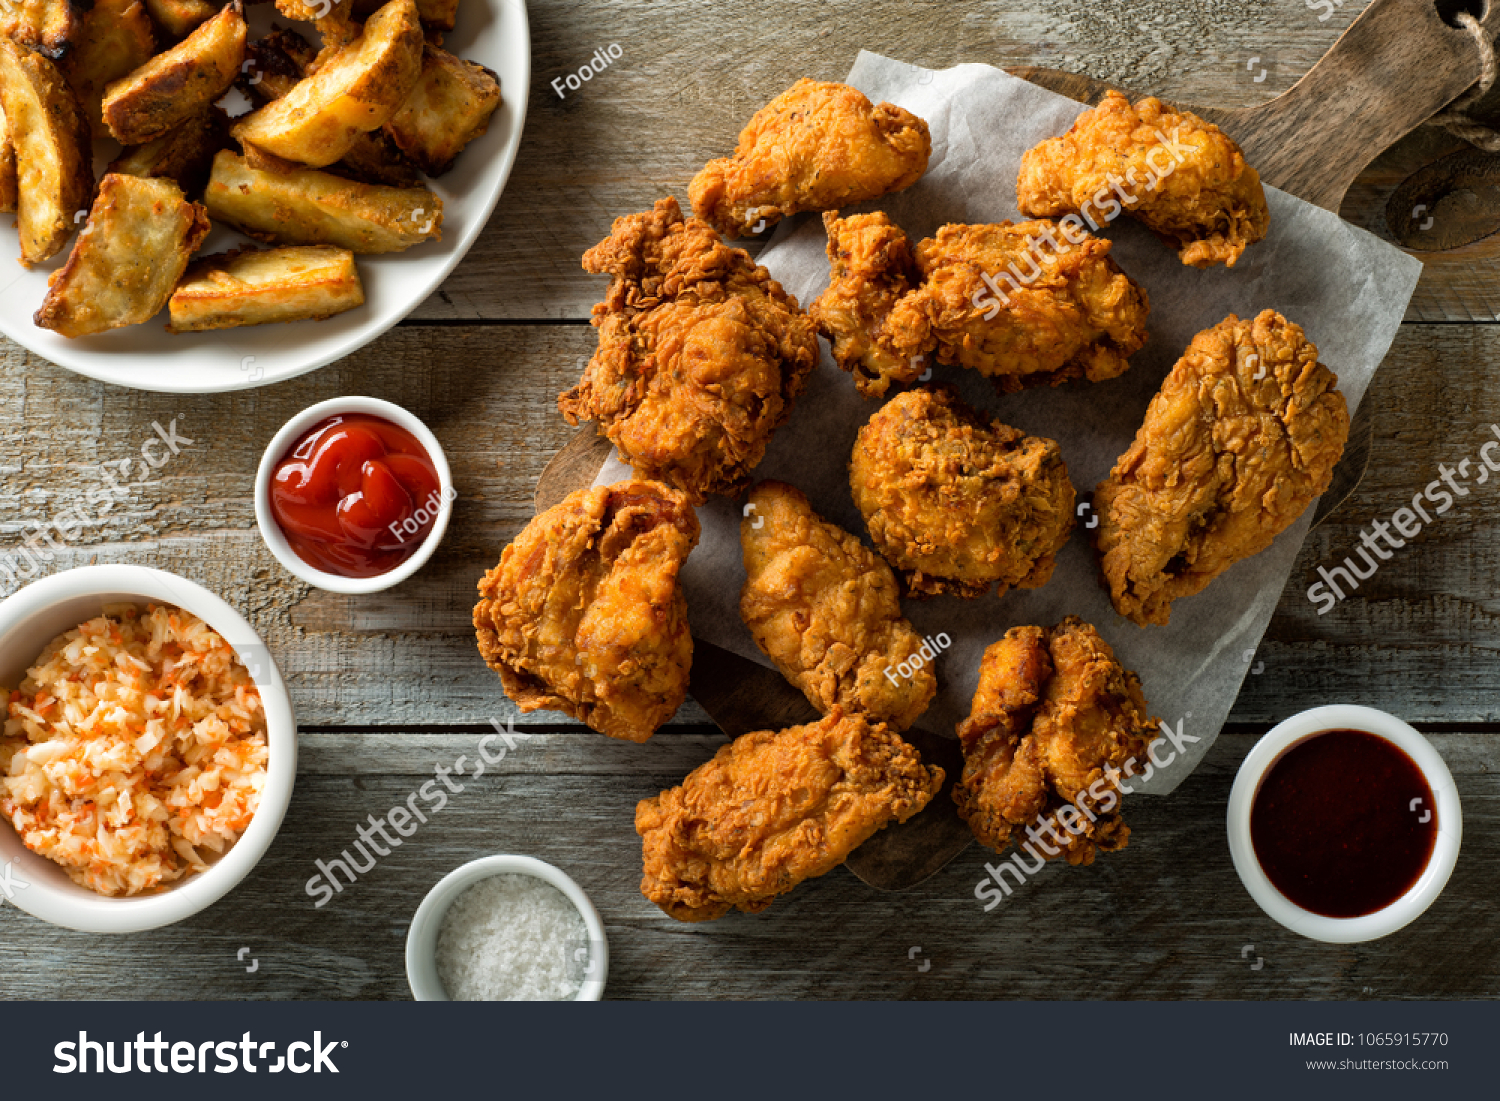 Delicious homemade crispy fried chicken with taters and coleslaw. #1065915770